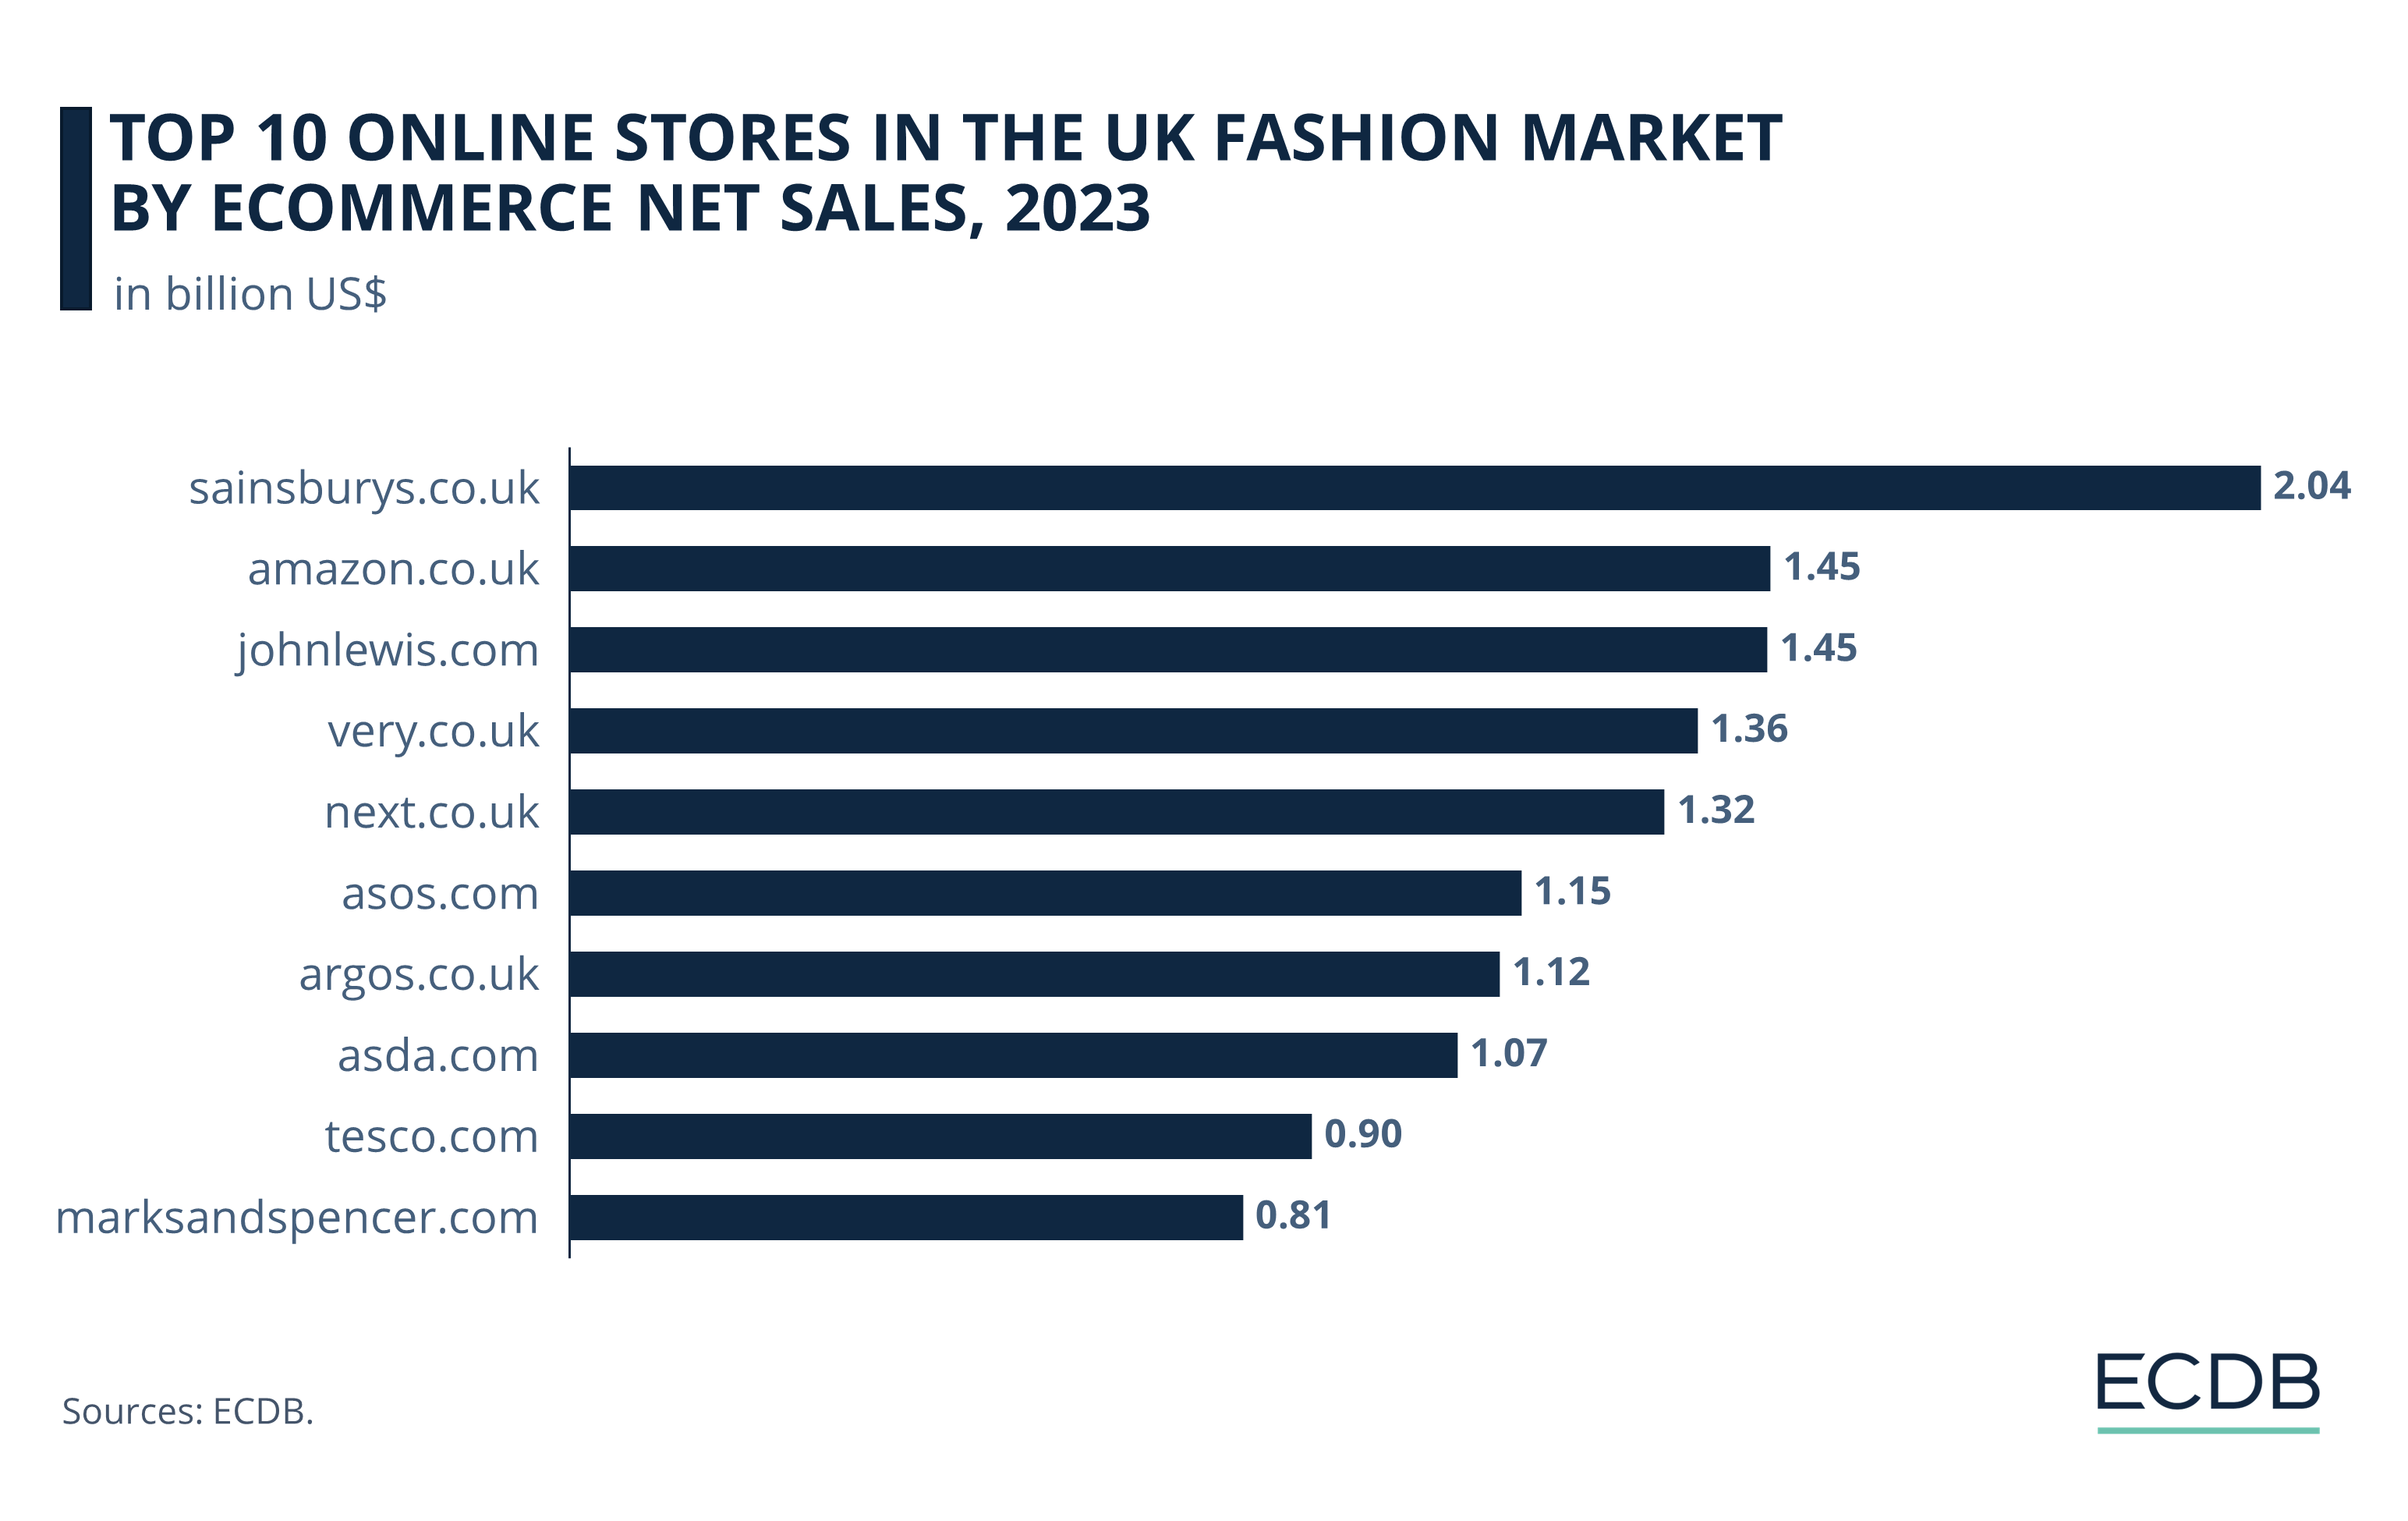 Top 10 Online Stores in the UK Fashion Market, 2023